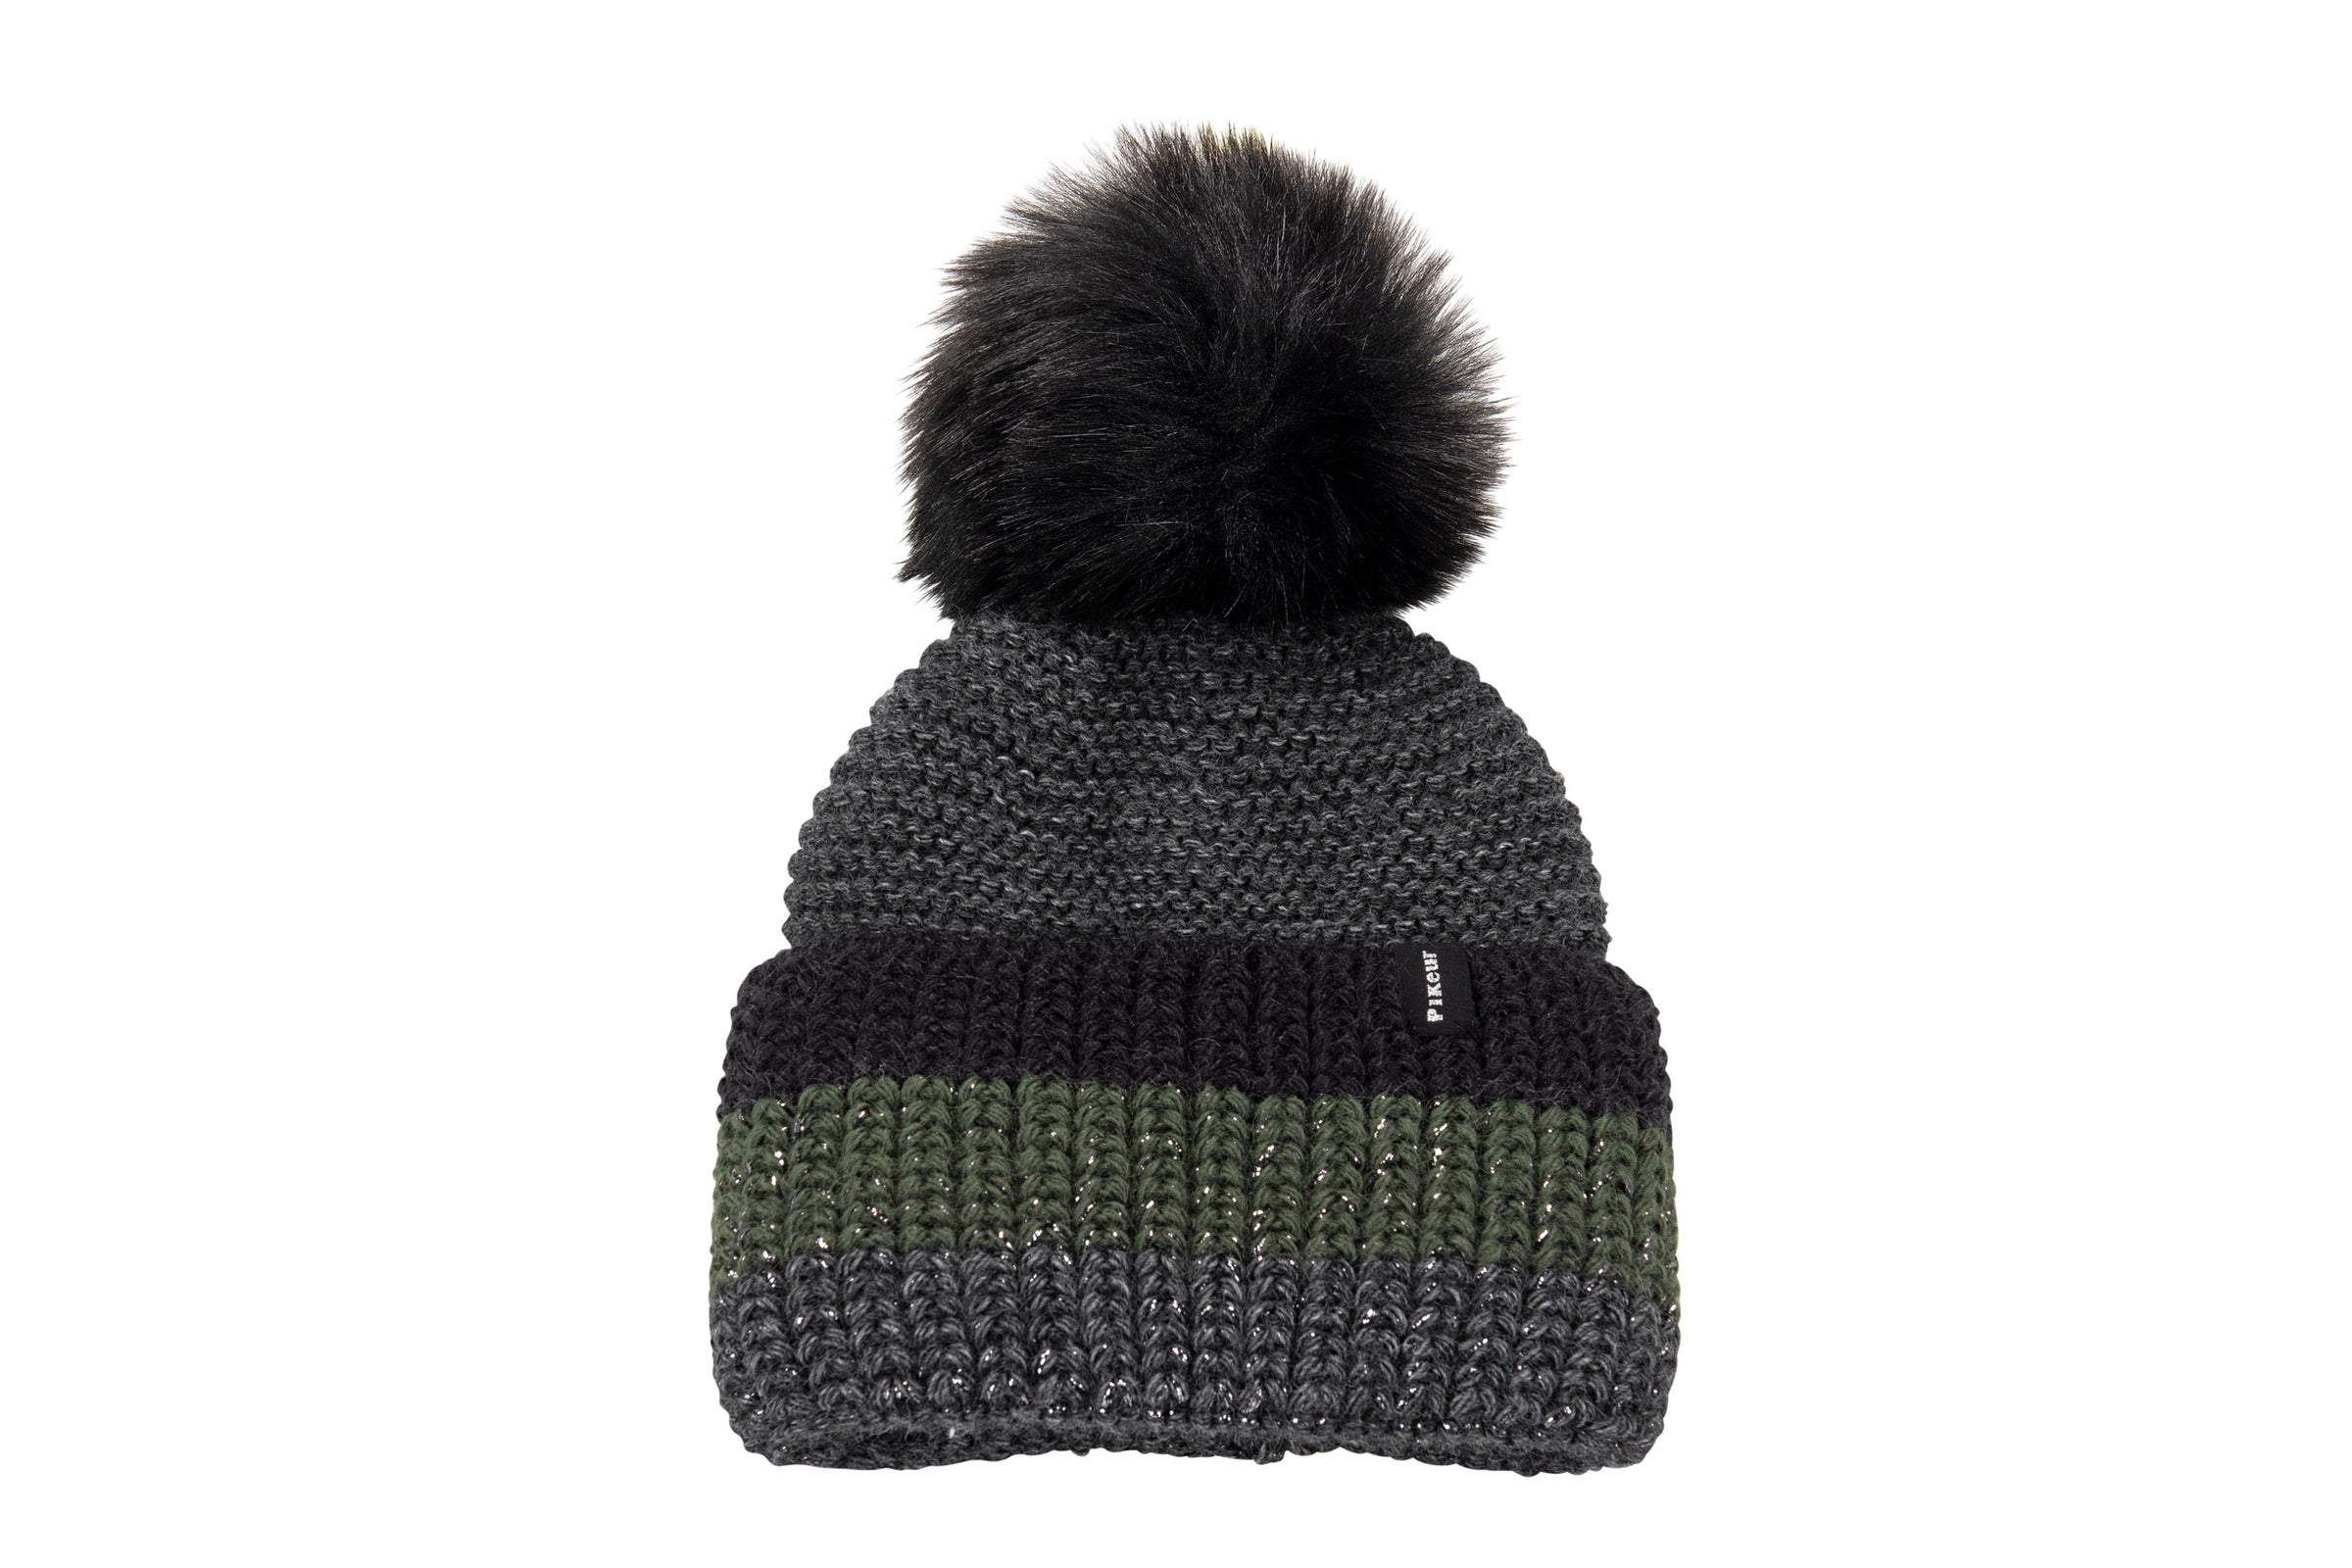 Pikeur green striped bobble hat